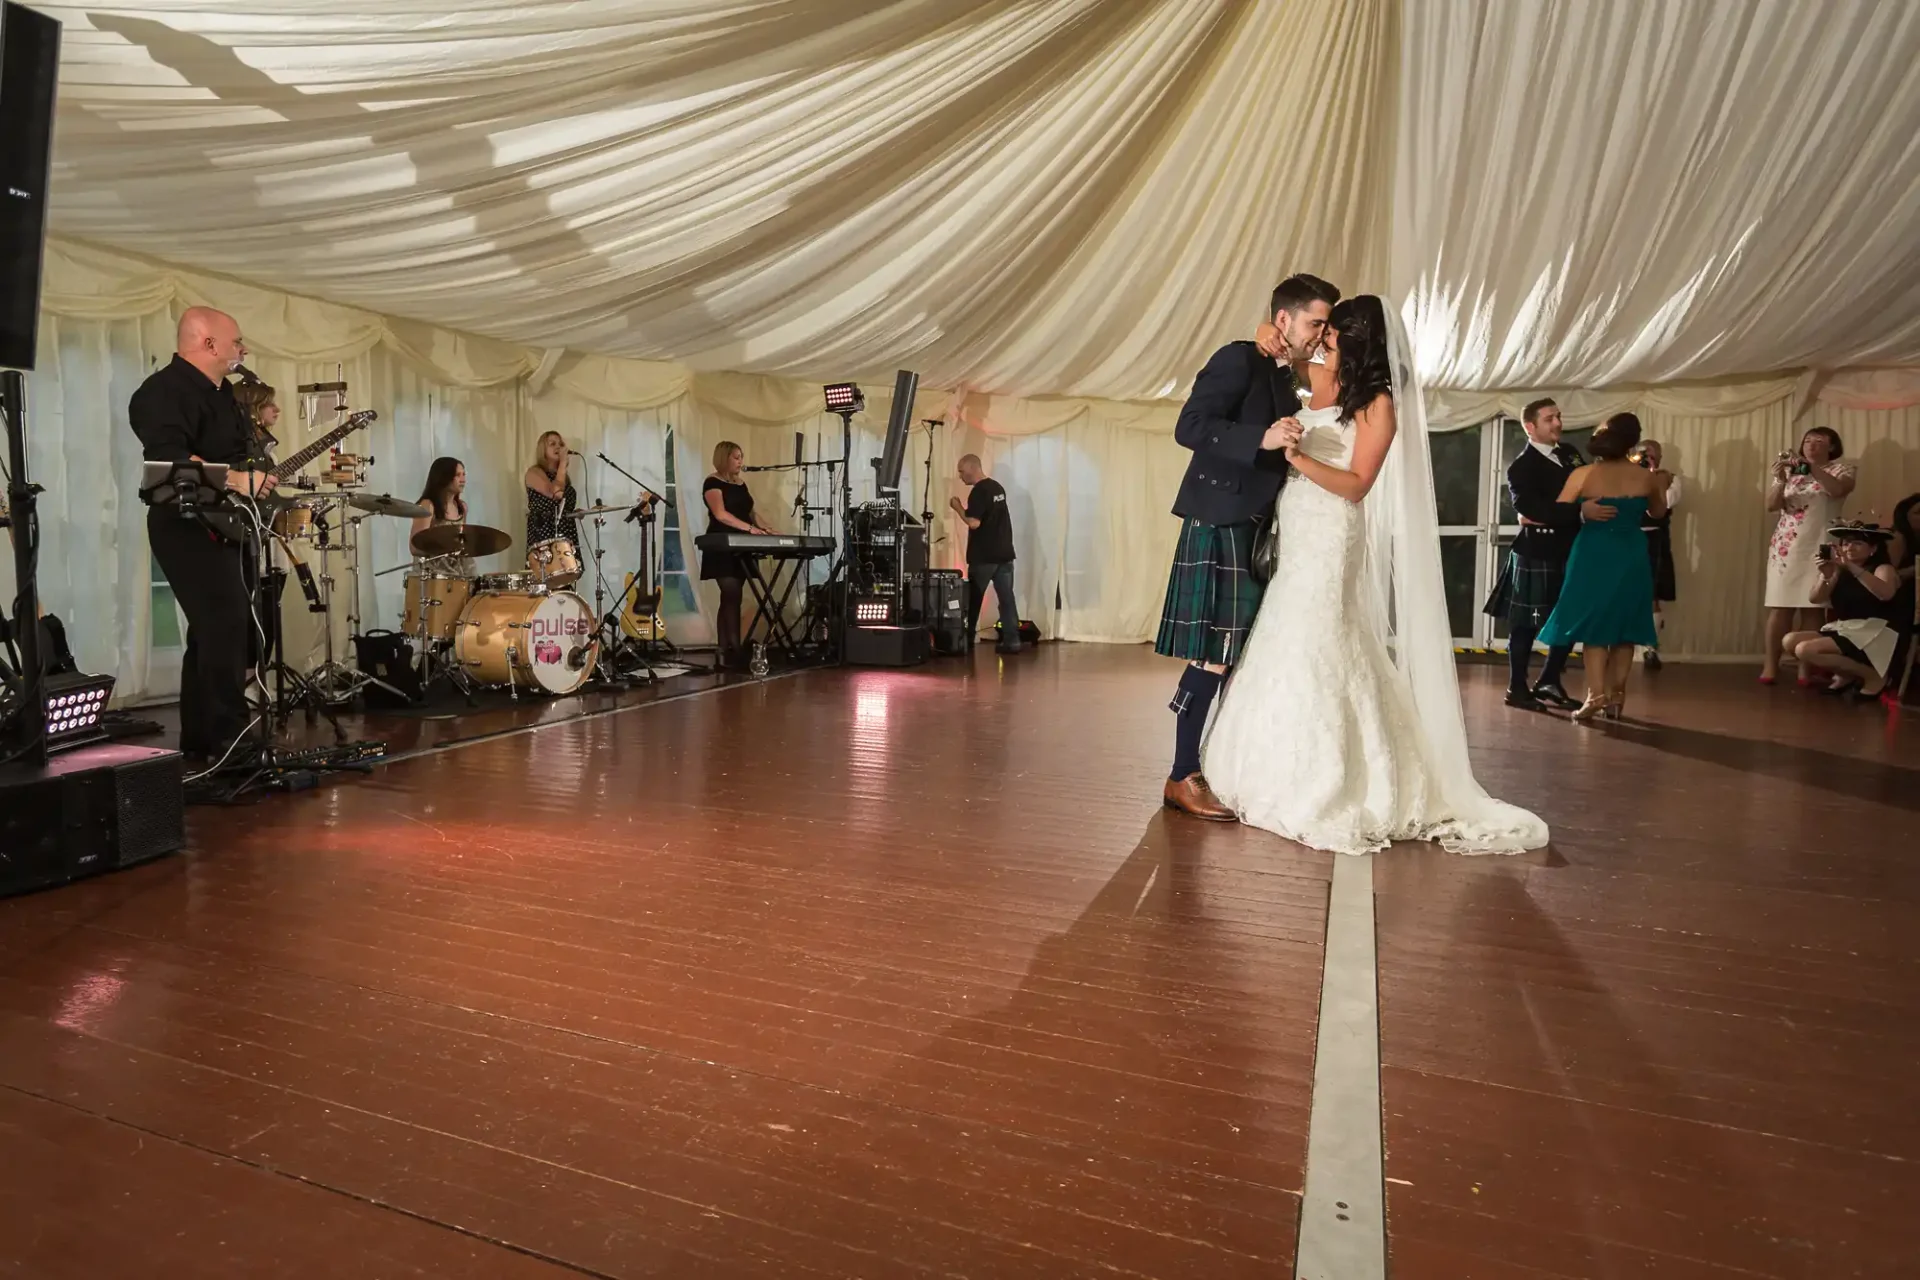 A bride and groom share a dance in a tent with a live band playing in the background and guests dancing around them.